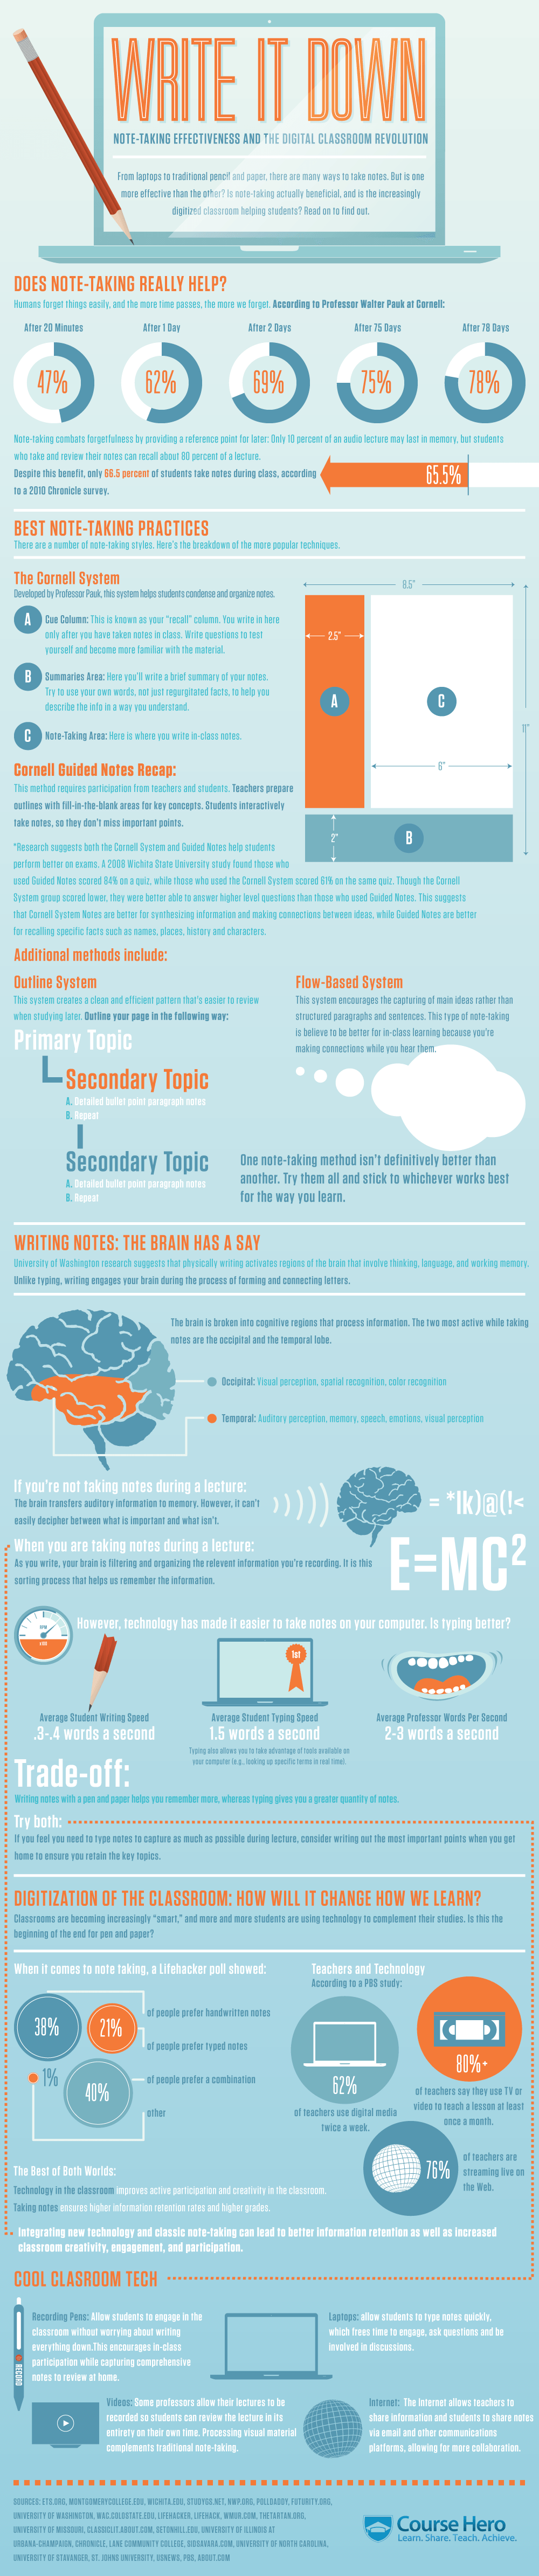 Infographic: The Power of the Pen - Scrively - note taking & writing